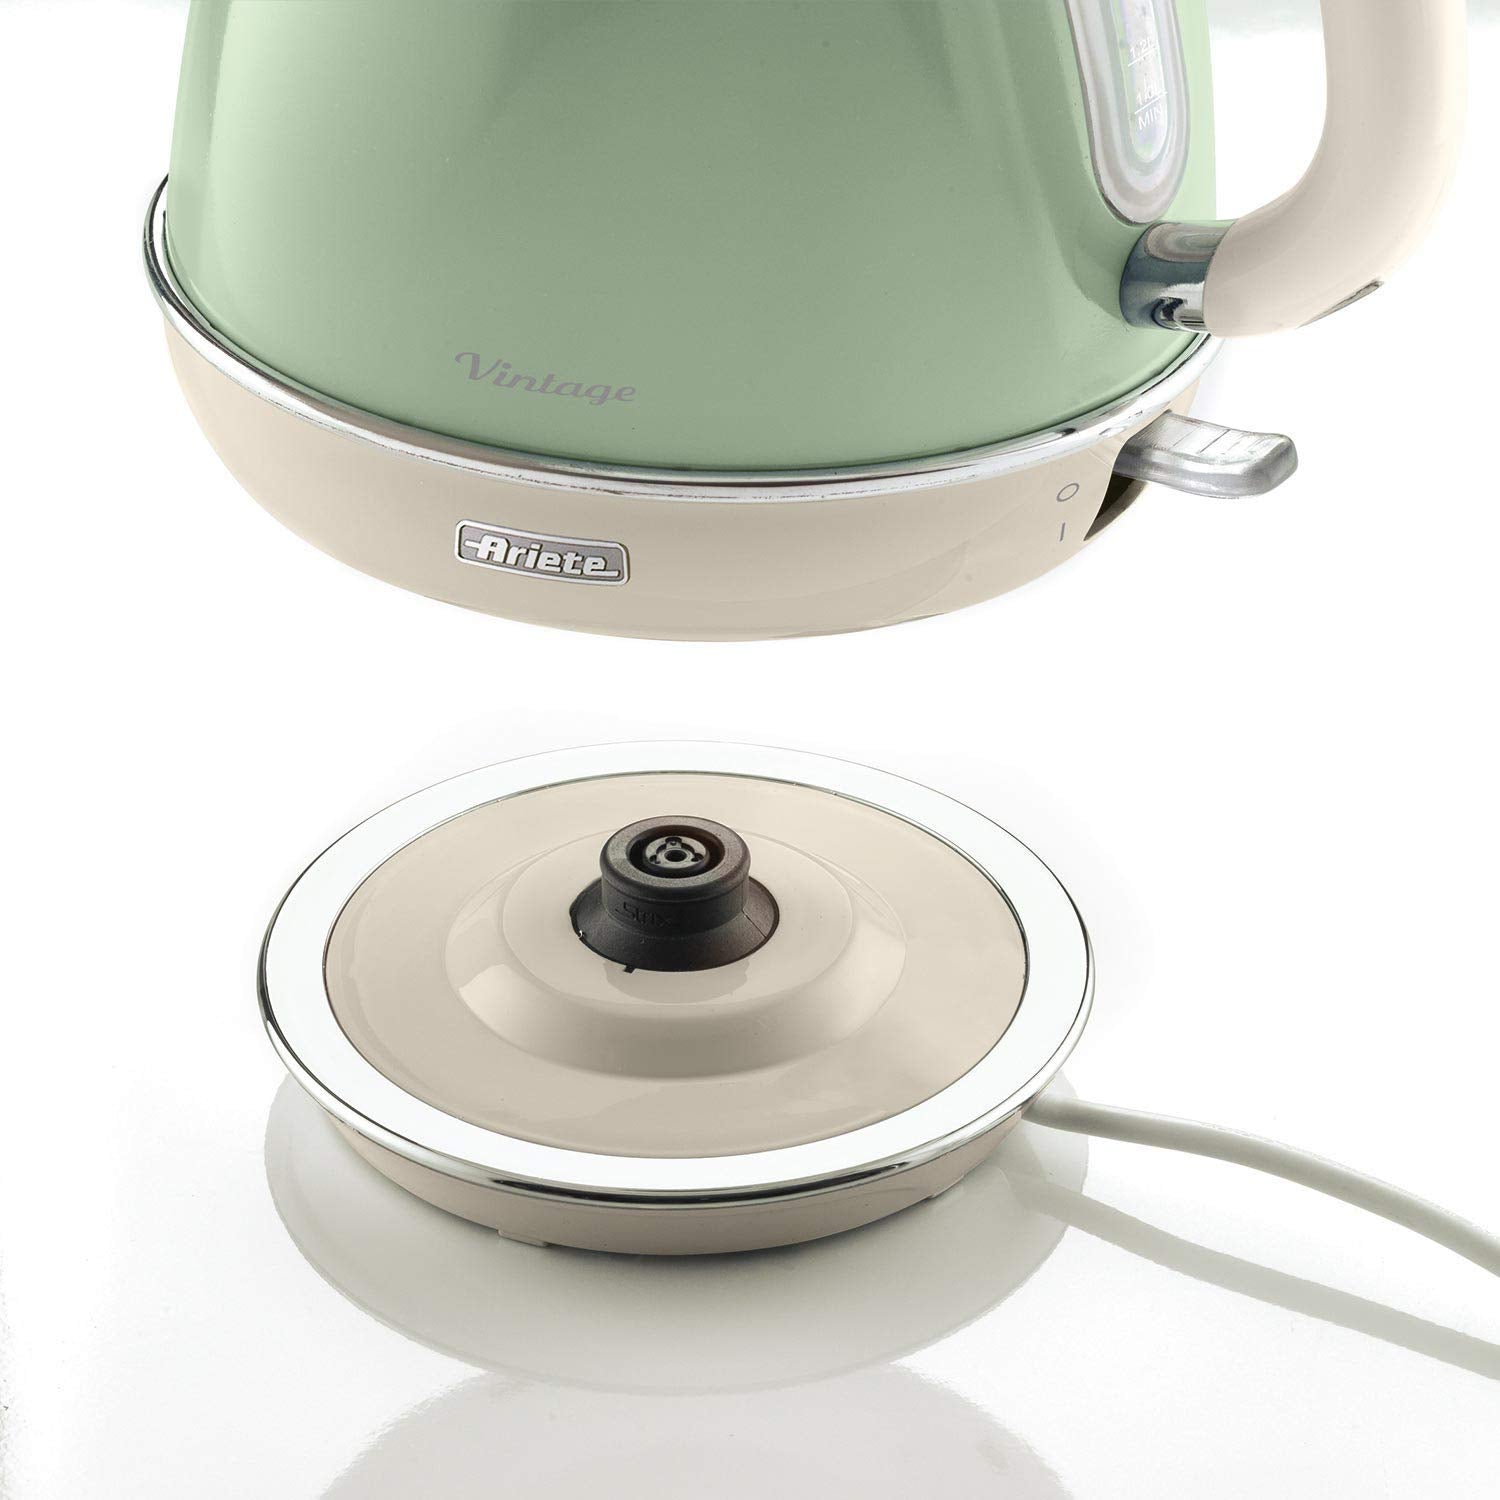 Ariete 2869 Vintage Electric Kettle, Stainless Steel, 1.7 L, Auto Switch Off, 2000 W, for Water, Tea and Herbal Teas, Pastel Green